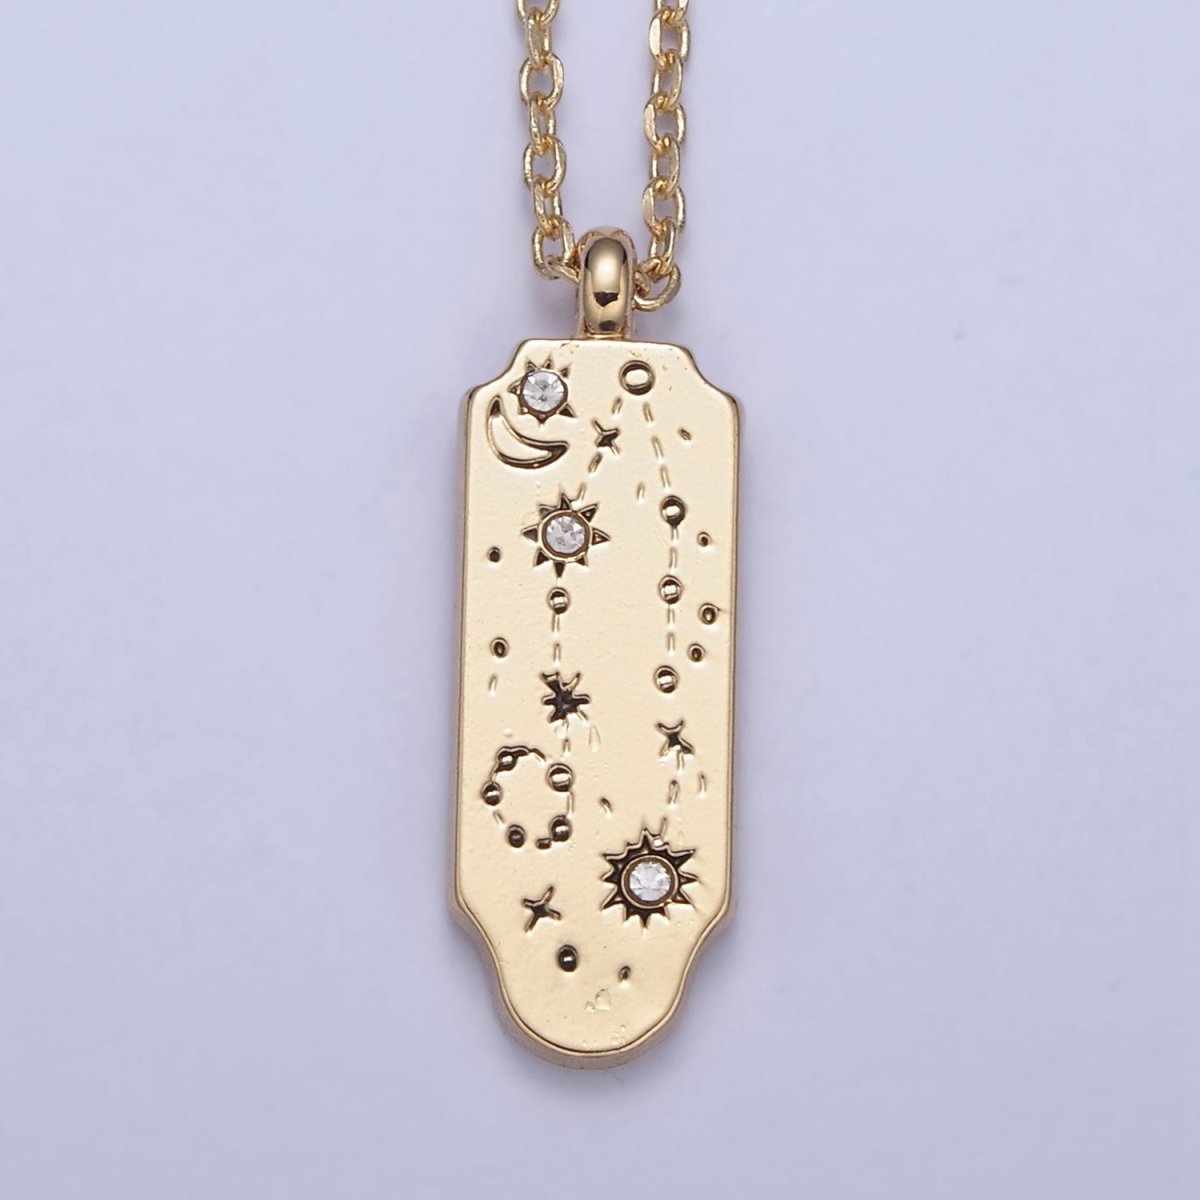 Constellation Zodiac Charms Necklace Astrology Zodiac Necklace Charms, 12 Zodiac Charms Ready to Wear Necklace for Personalized Jewelry Wholesale | WA-491 to WA-502 Clearance Pricing - DLUXCA